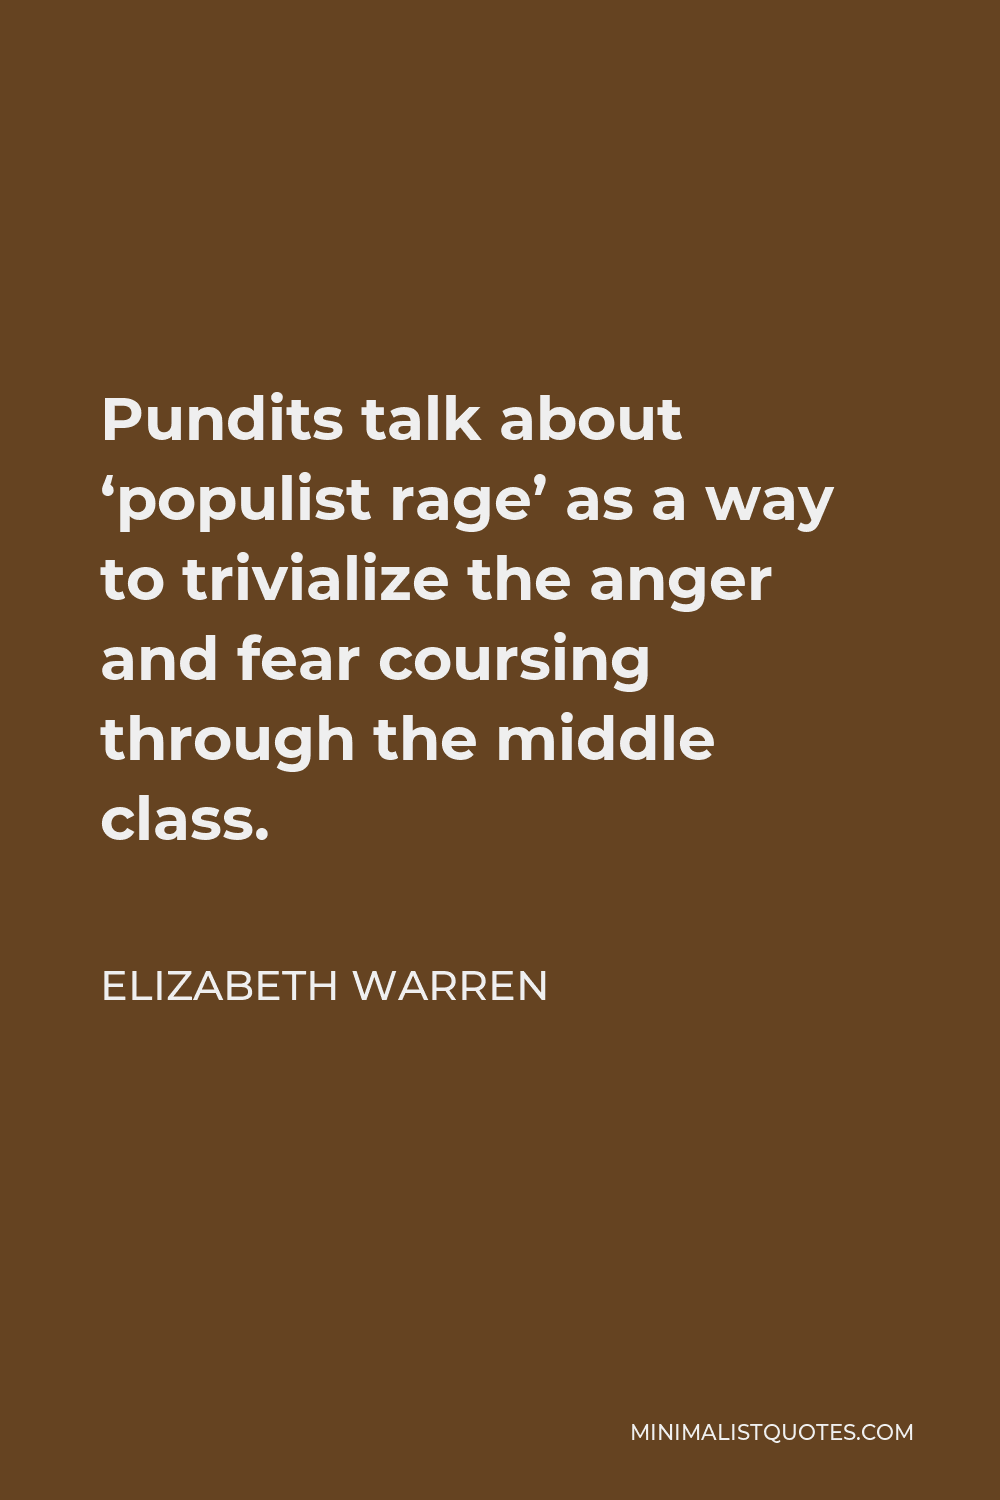 Elizabeth Warren Quote - Pundits talk about ‘populist rage’ as a way to trivialize the anger and fear coursing through the middle class.